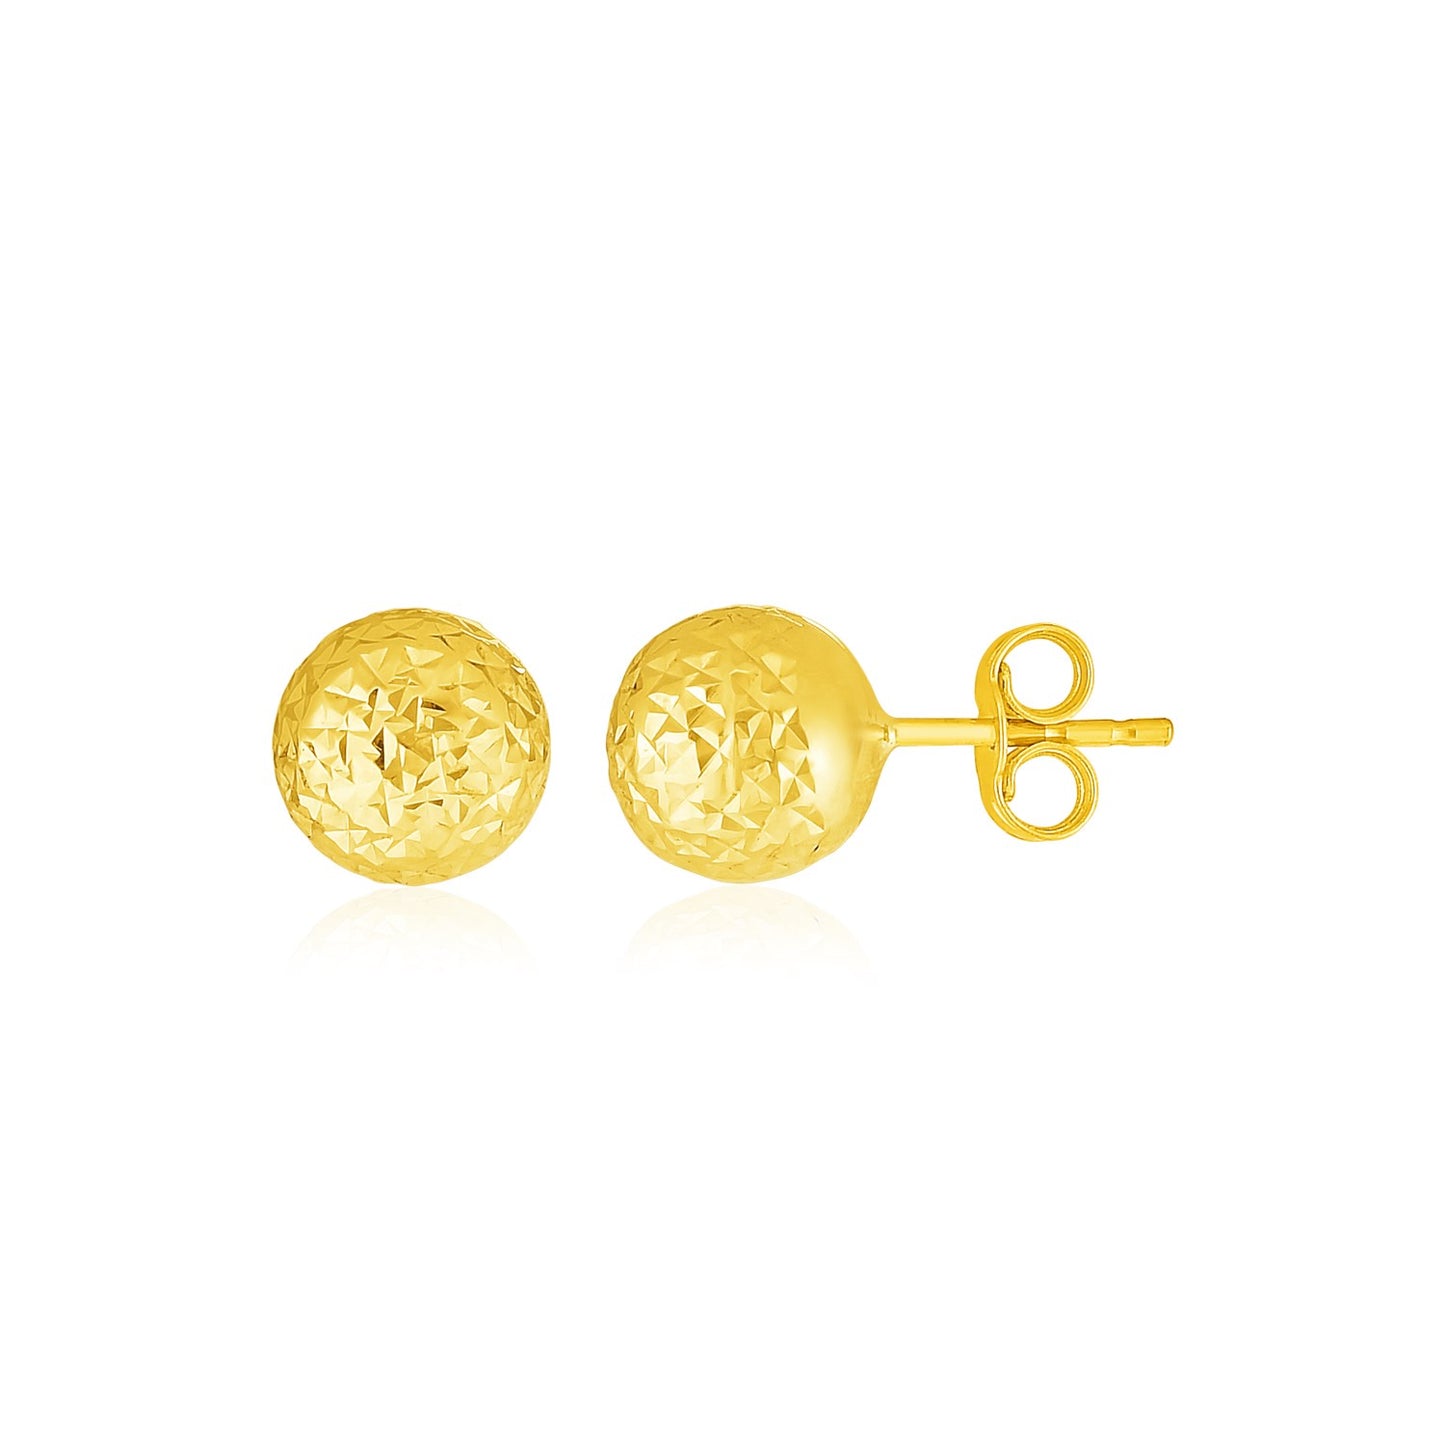 14k Yellow Gold Ball Earrings with Crystal Cut Texture